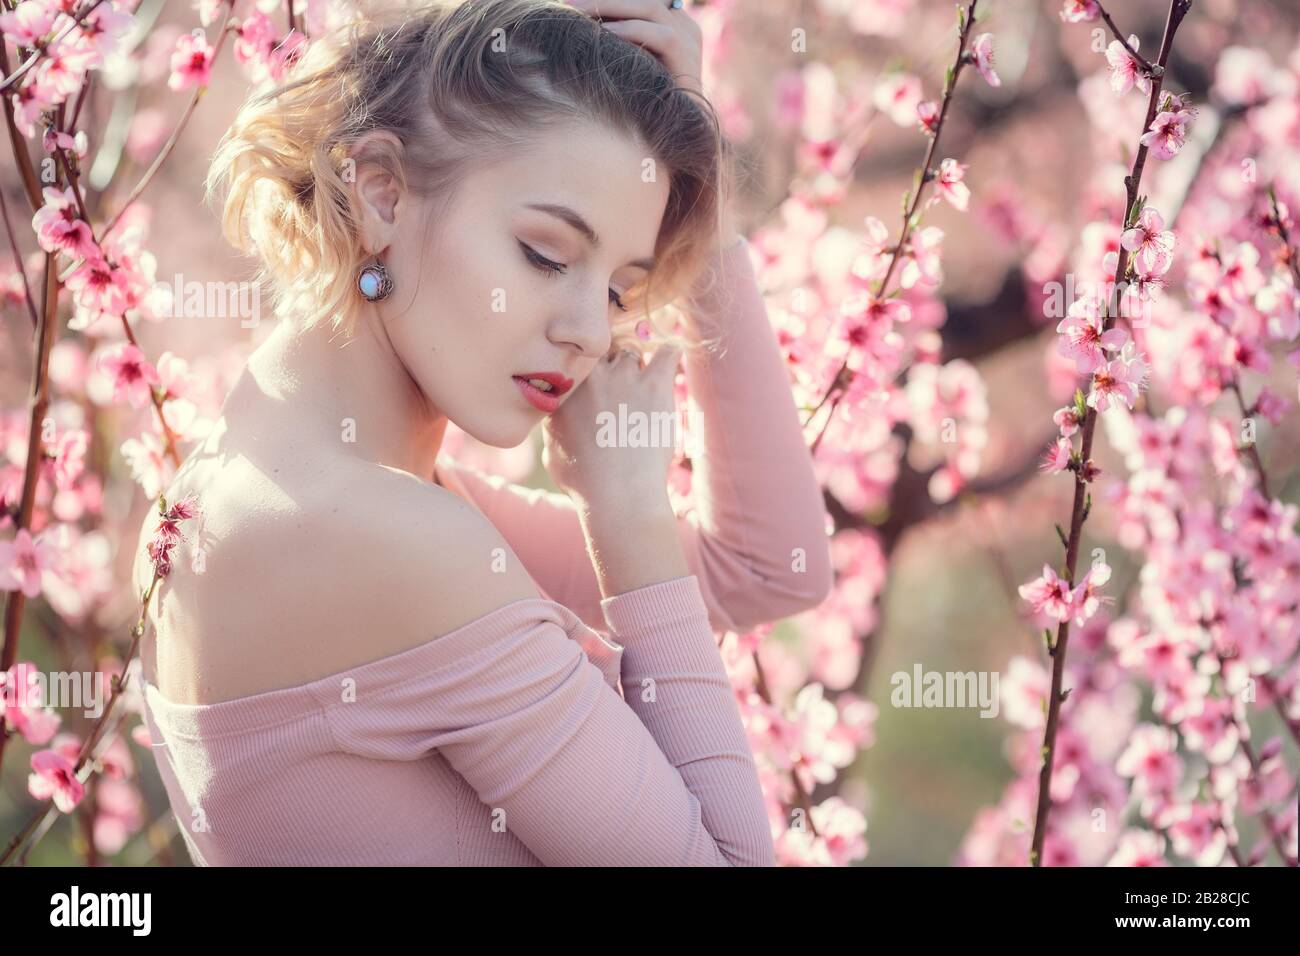 fashion outdoor photo of gorgeous young woman in elegant dress posing in garden with blossom peach trees. Blonde in flowering gardens Stock Photo